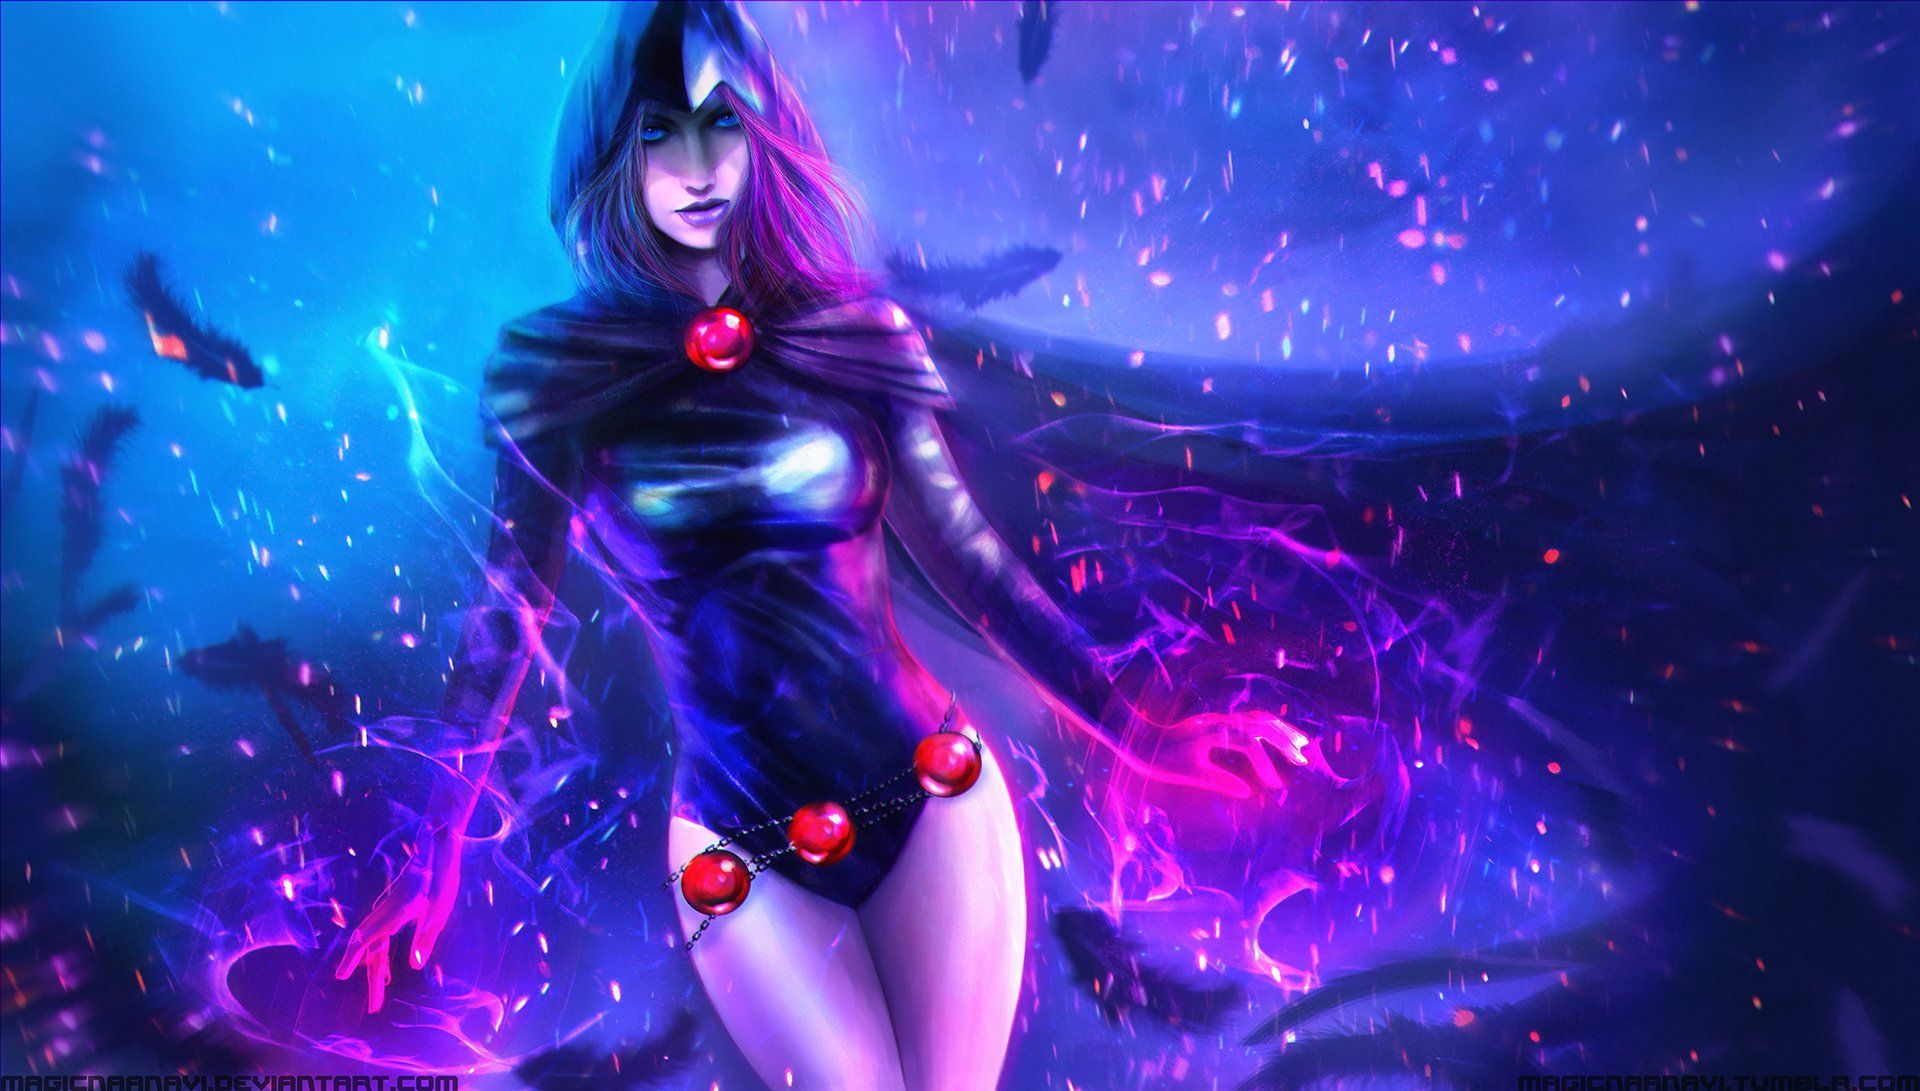 Raven (DC Comics) HD Wallpaper and Background Image